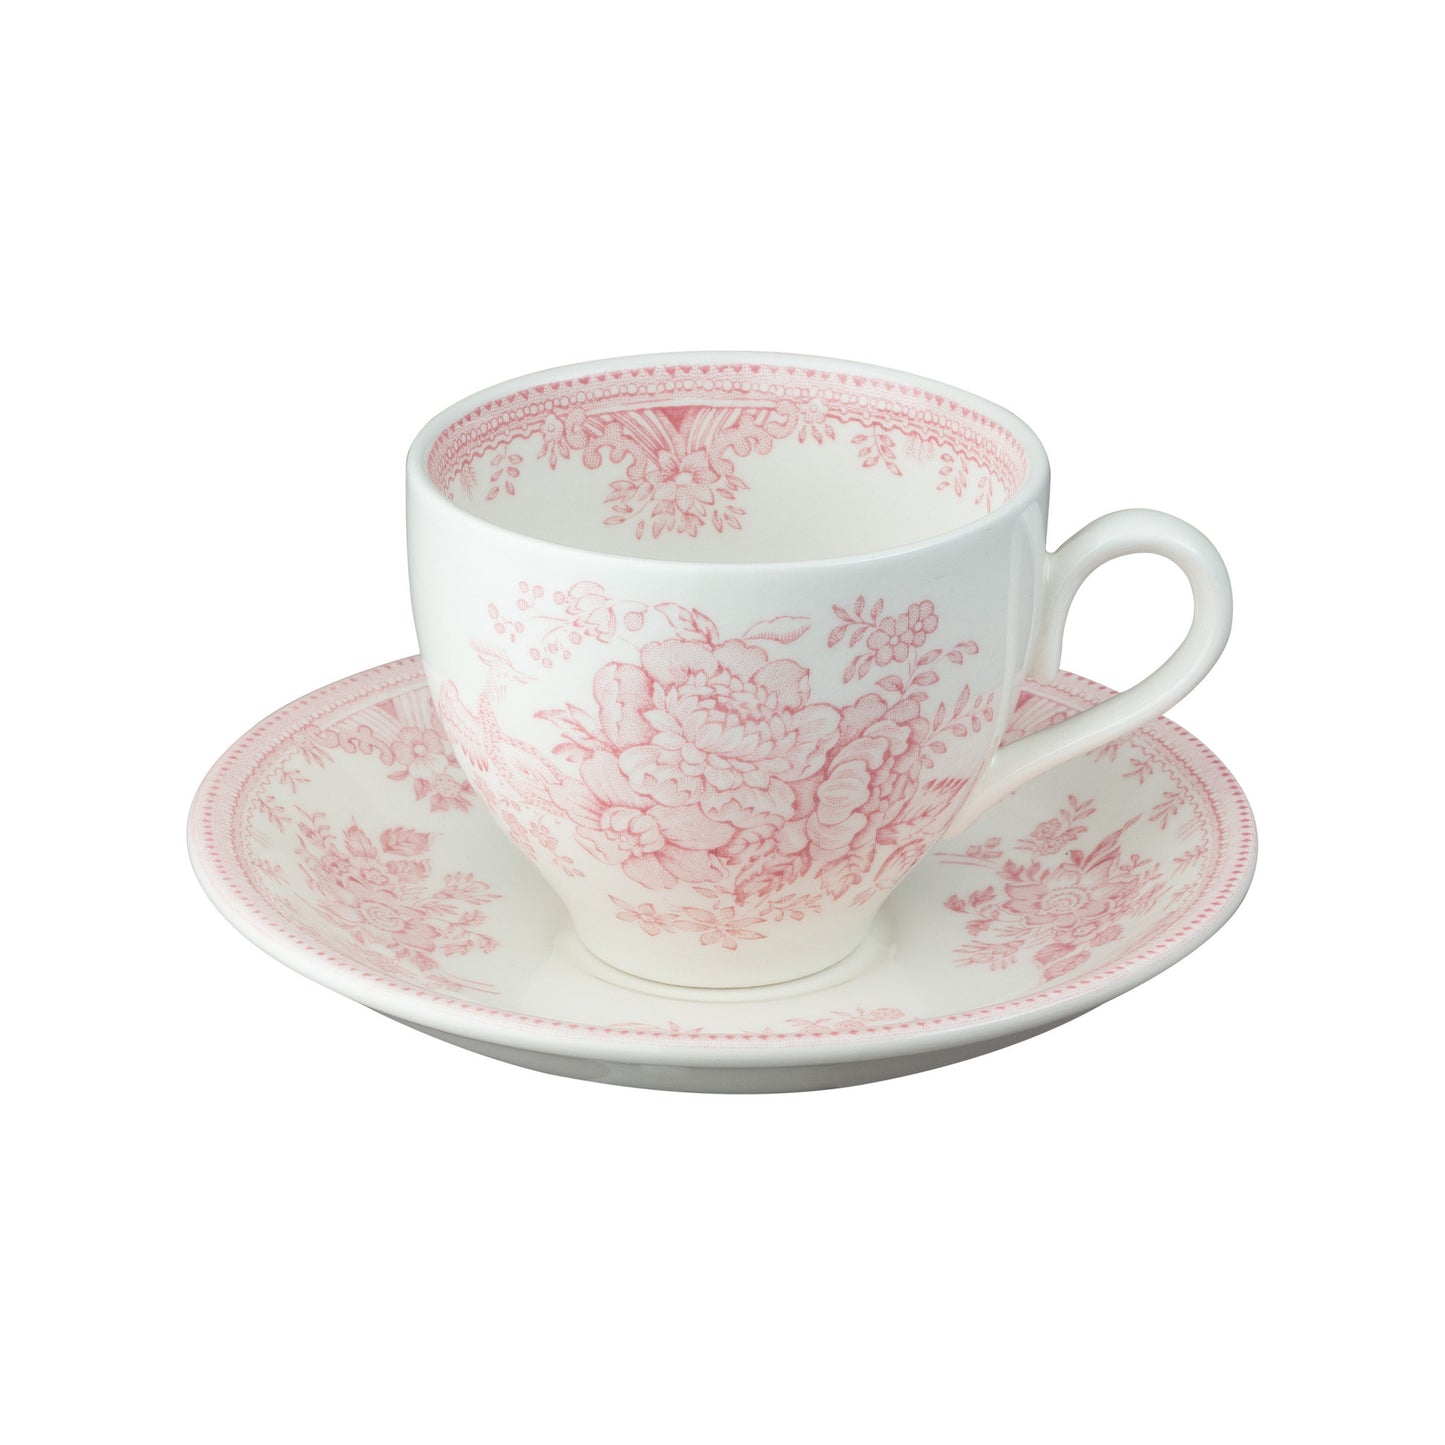 Pink Asiatic Pheasants Teacup and Saucer